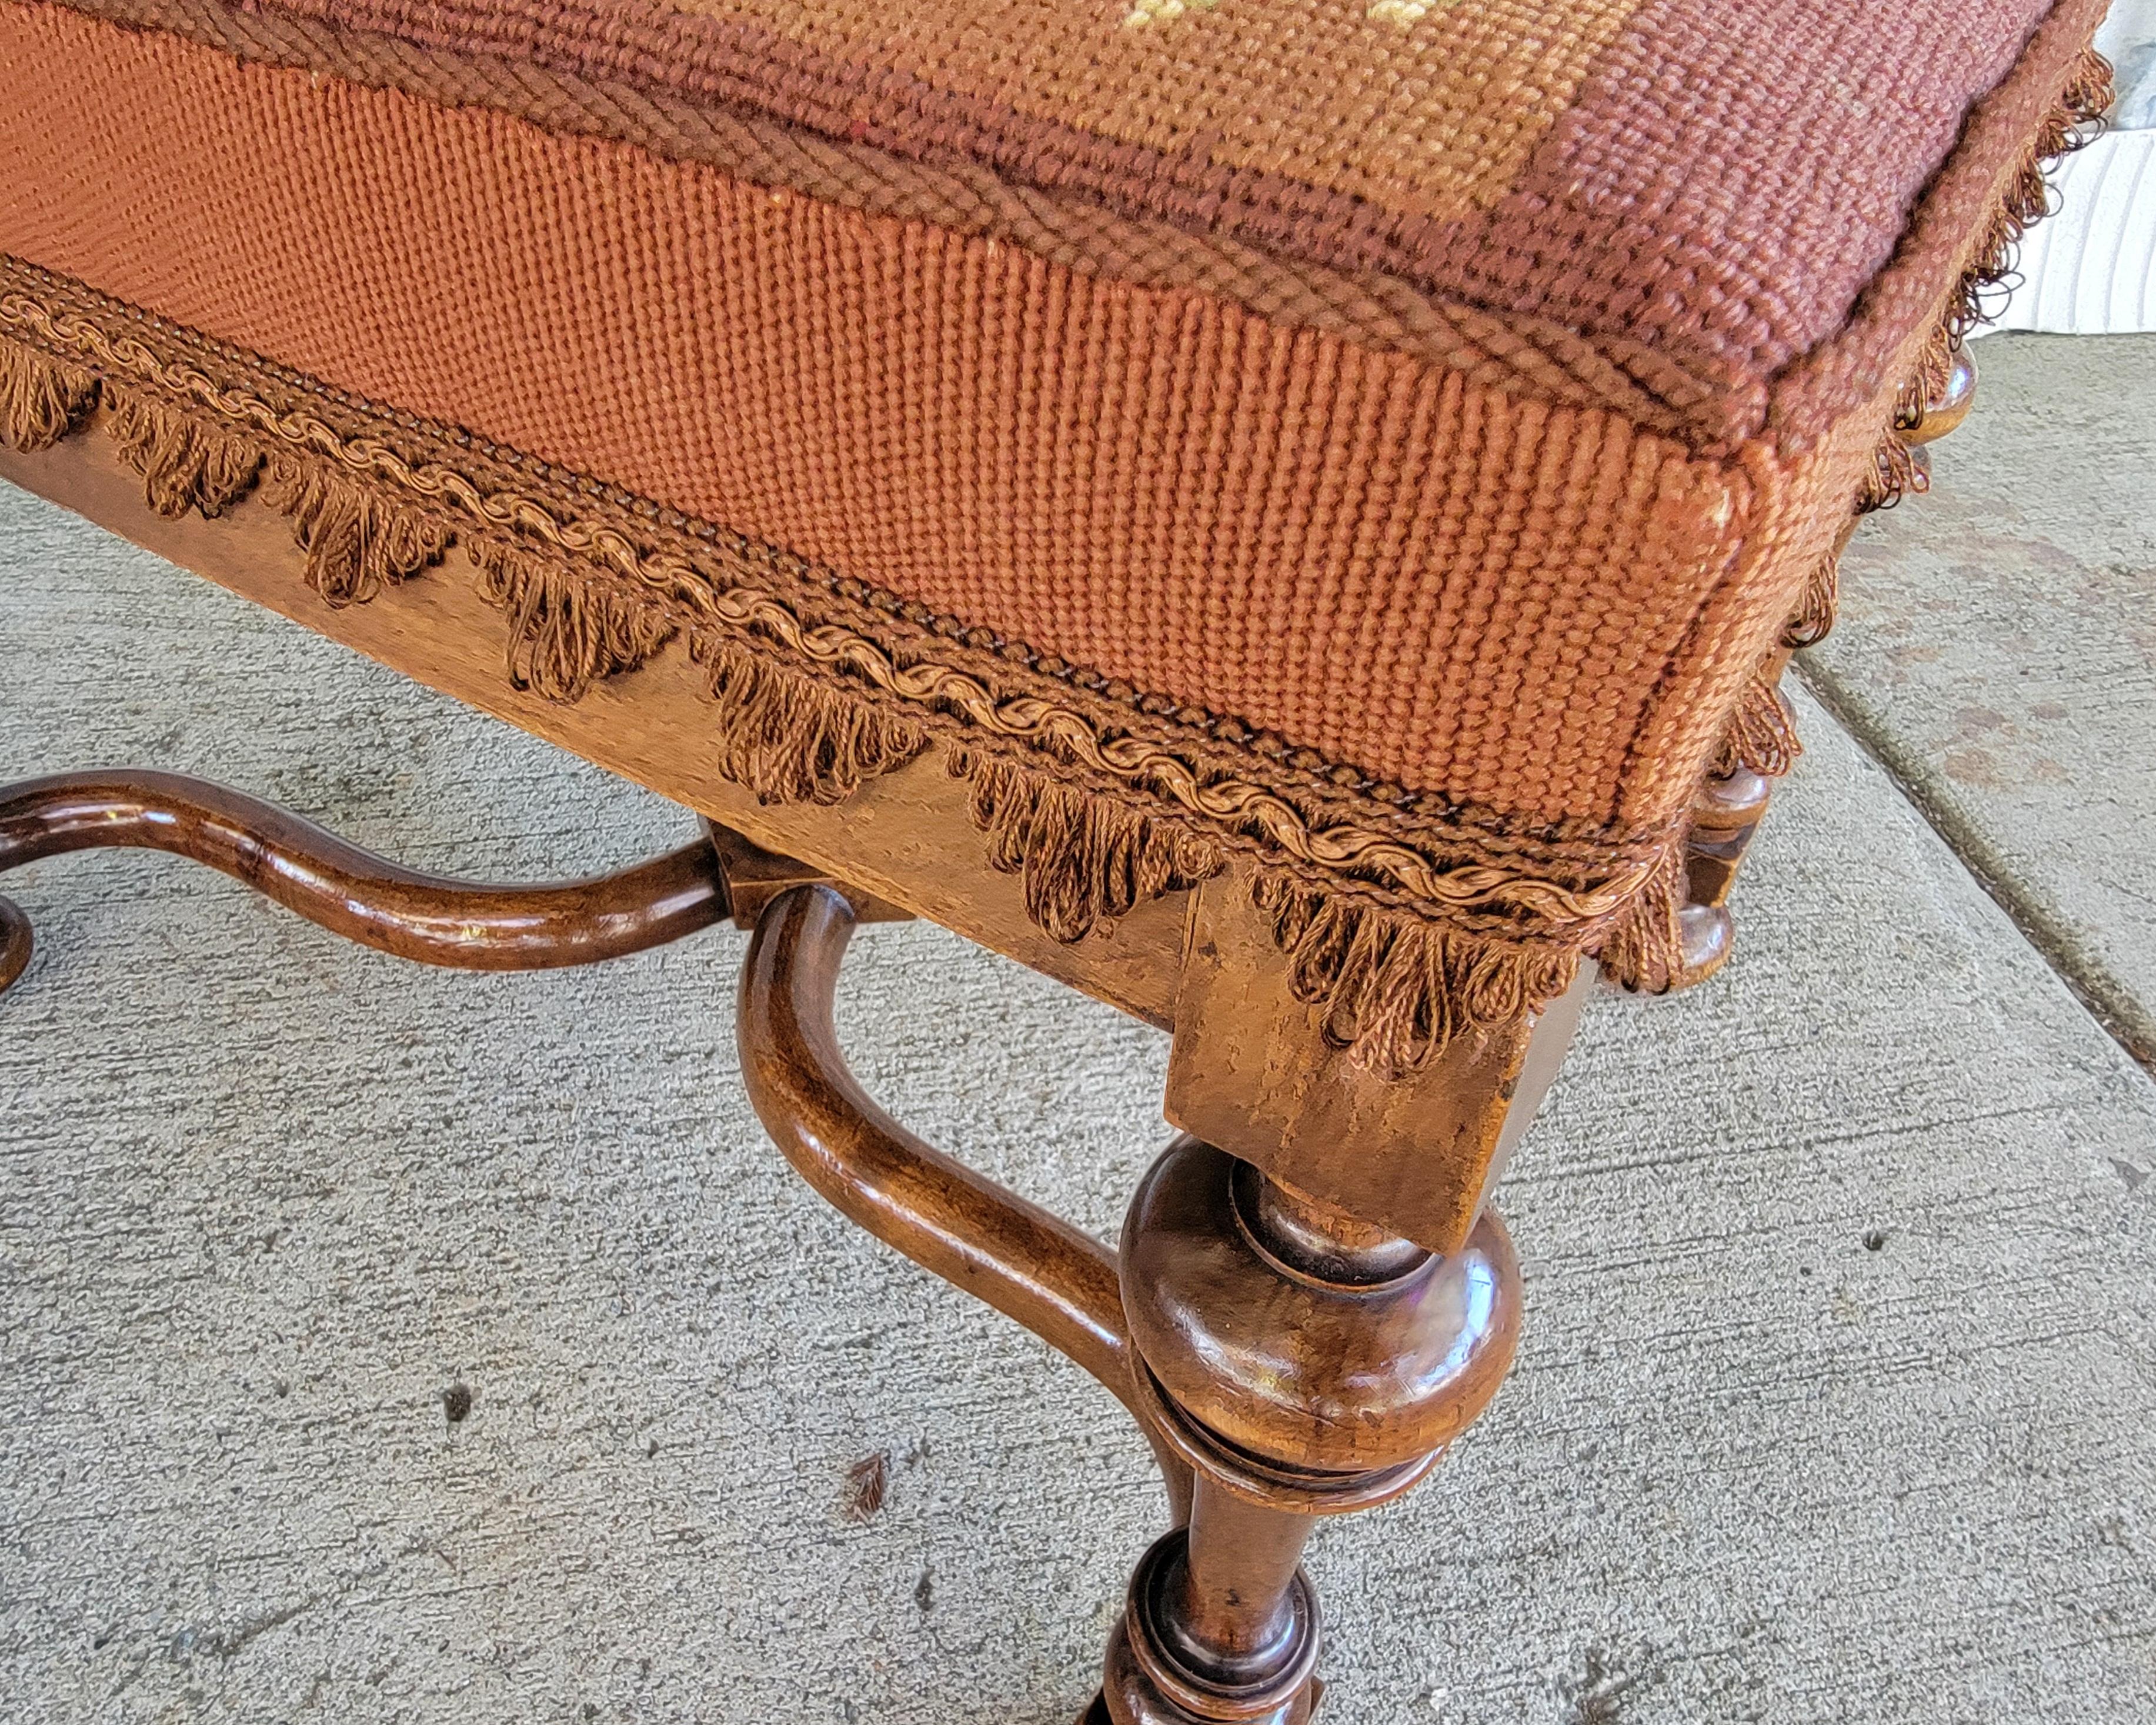 Early 20th Century Needlepoint Footstool / Ottoman In Good Condition For Sale In Fulton, CA